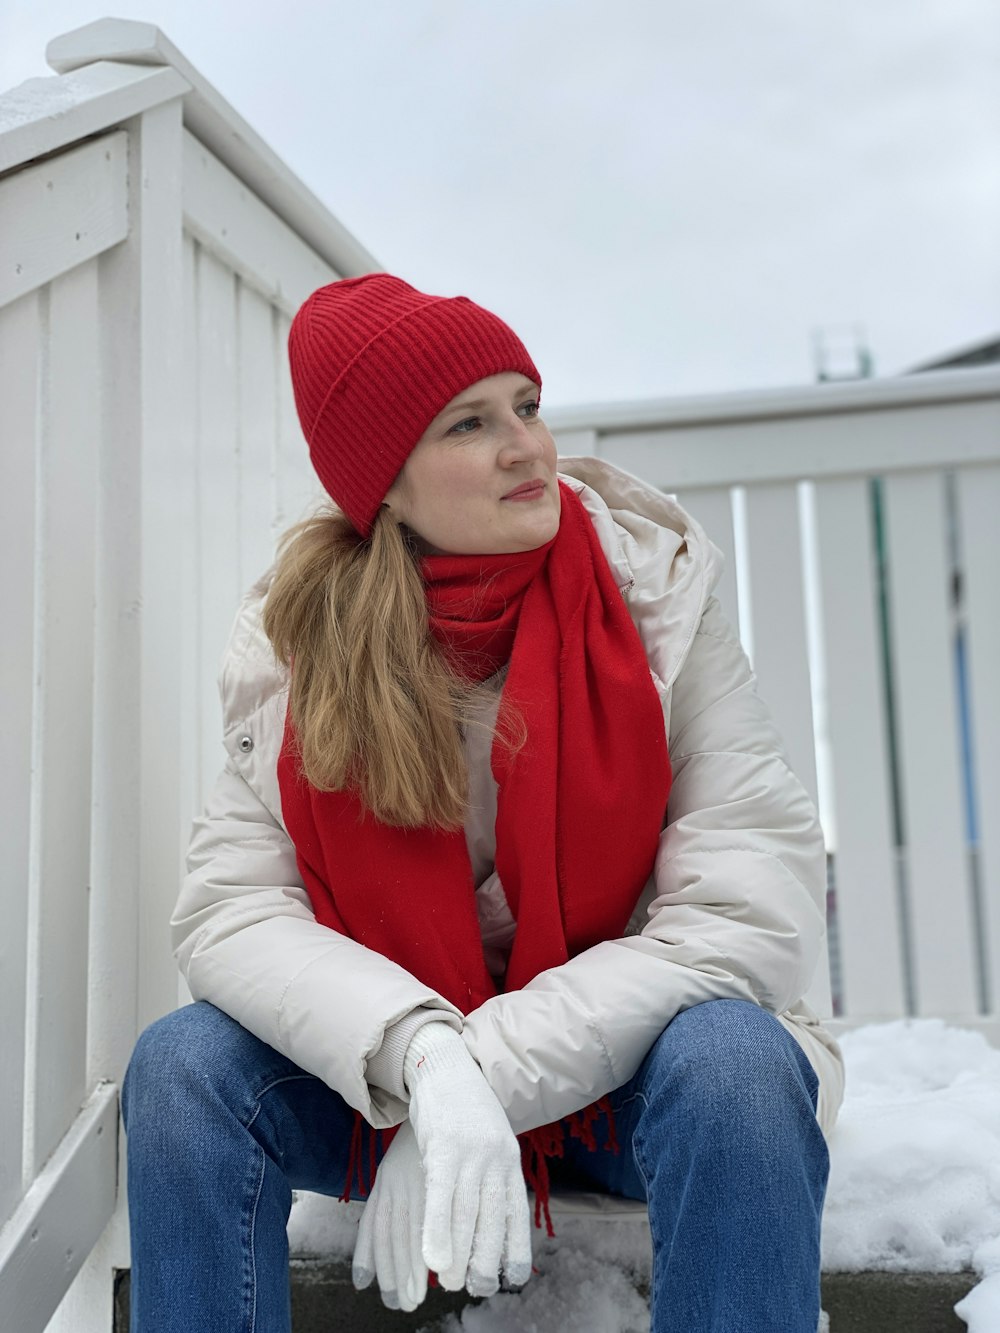 woman in red knit cap and white jacket sitting on white wooden bench during daytime